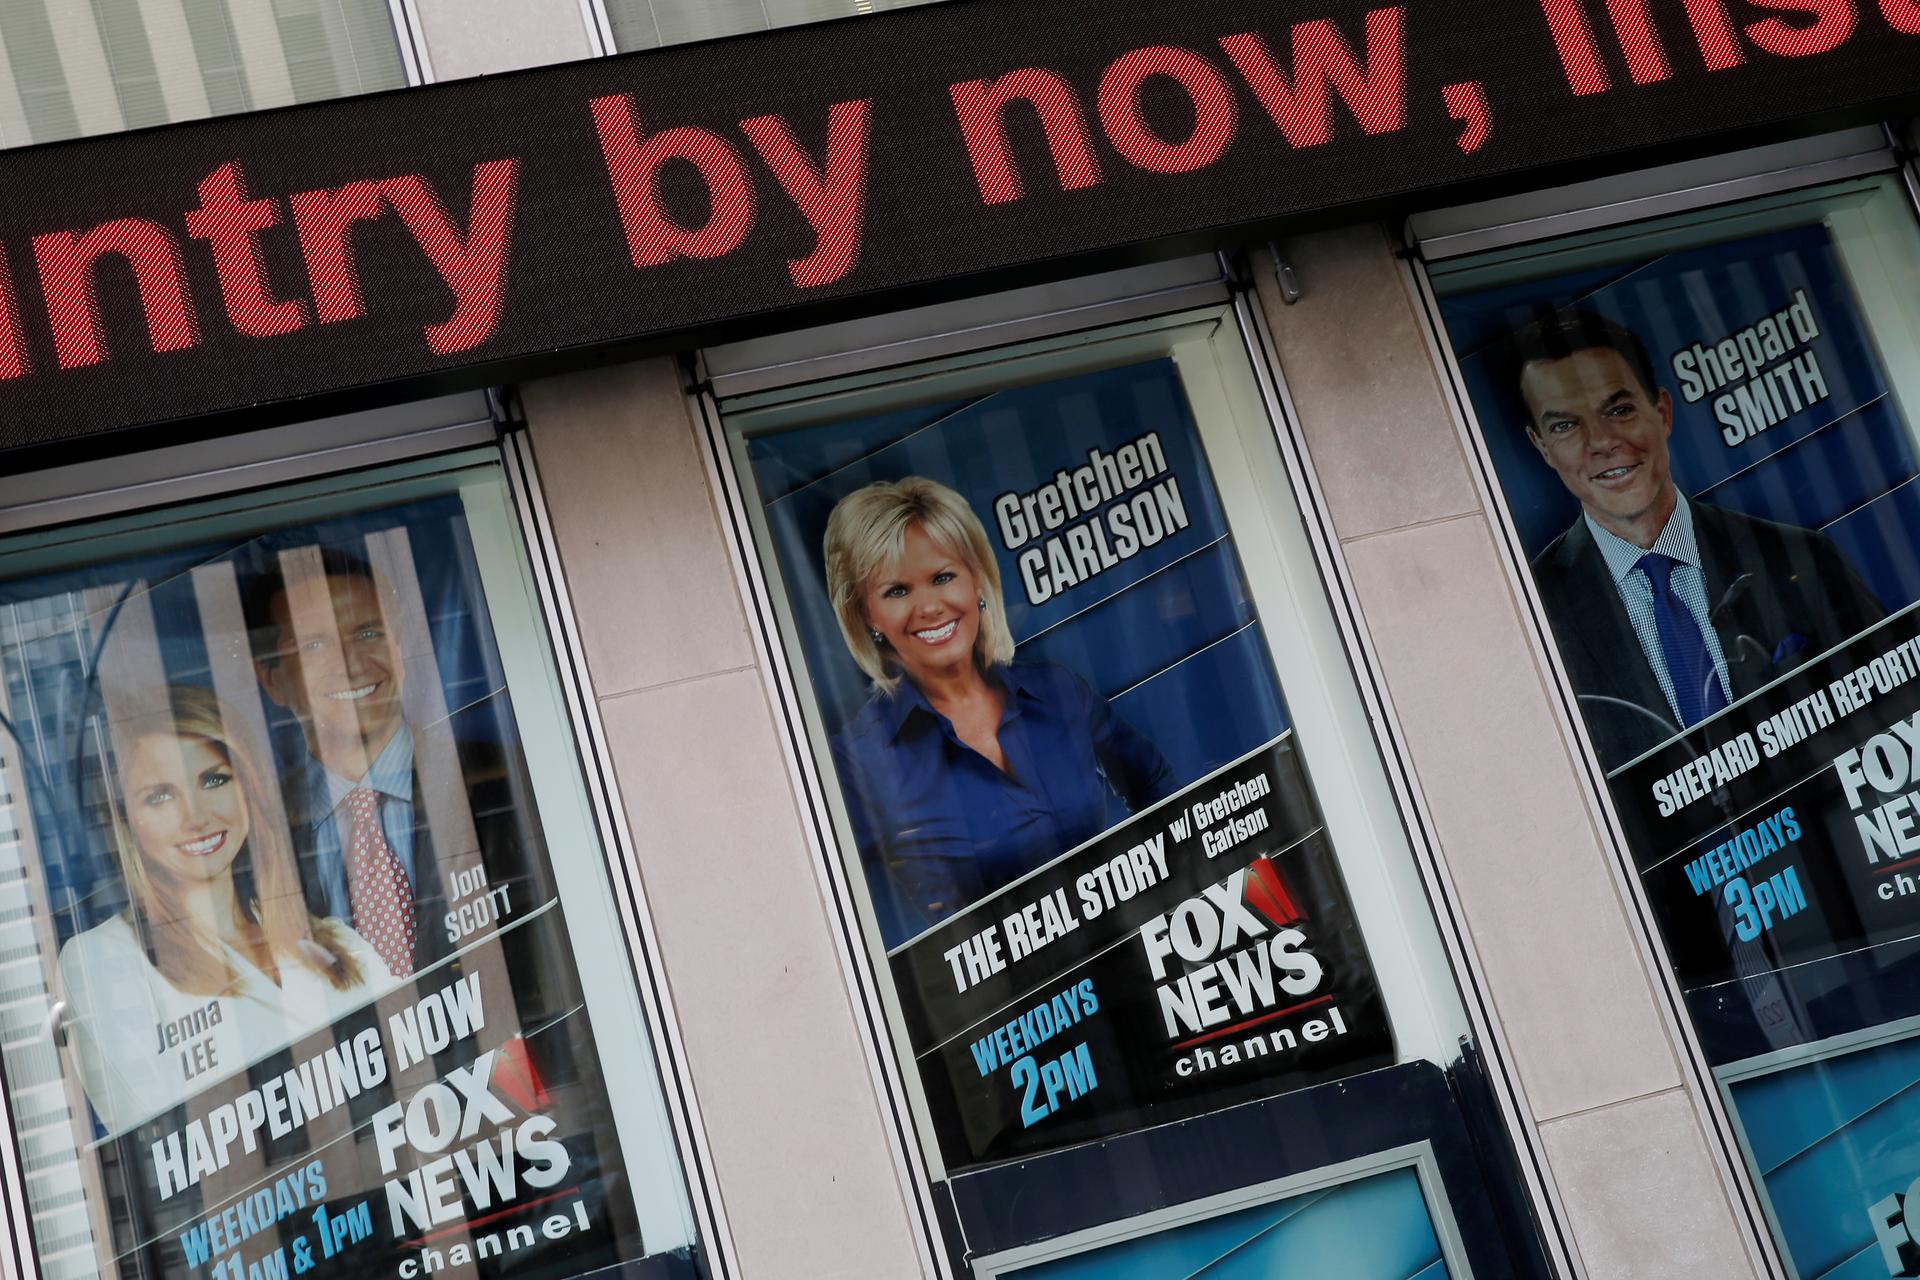 Posters of Fox News personalities including Gretchen Carlson